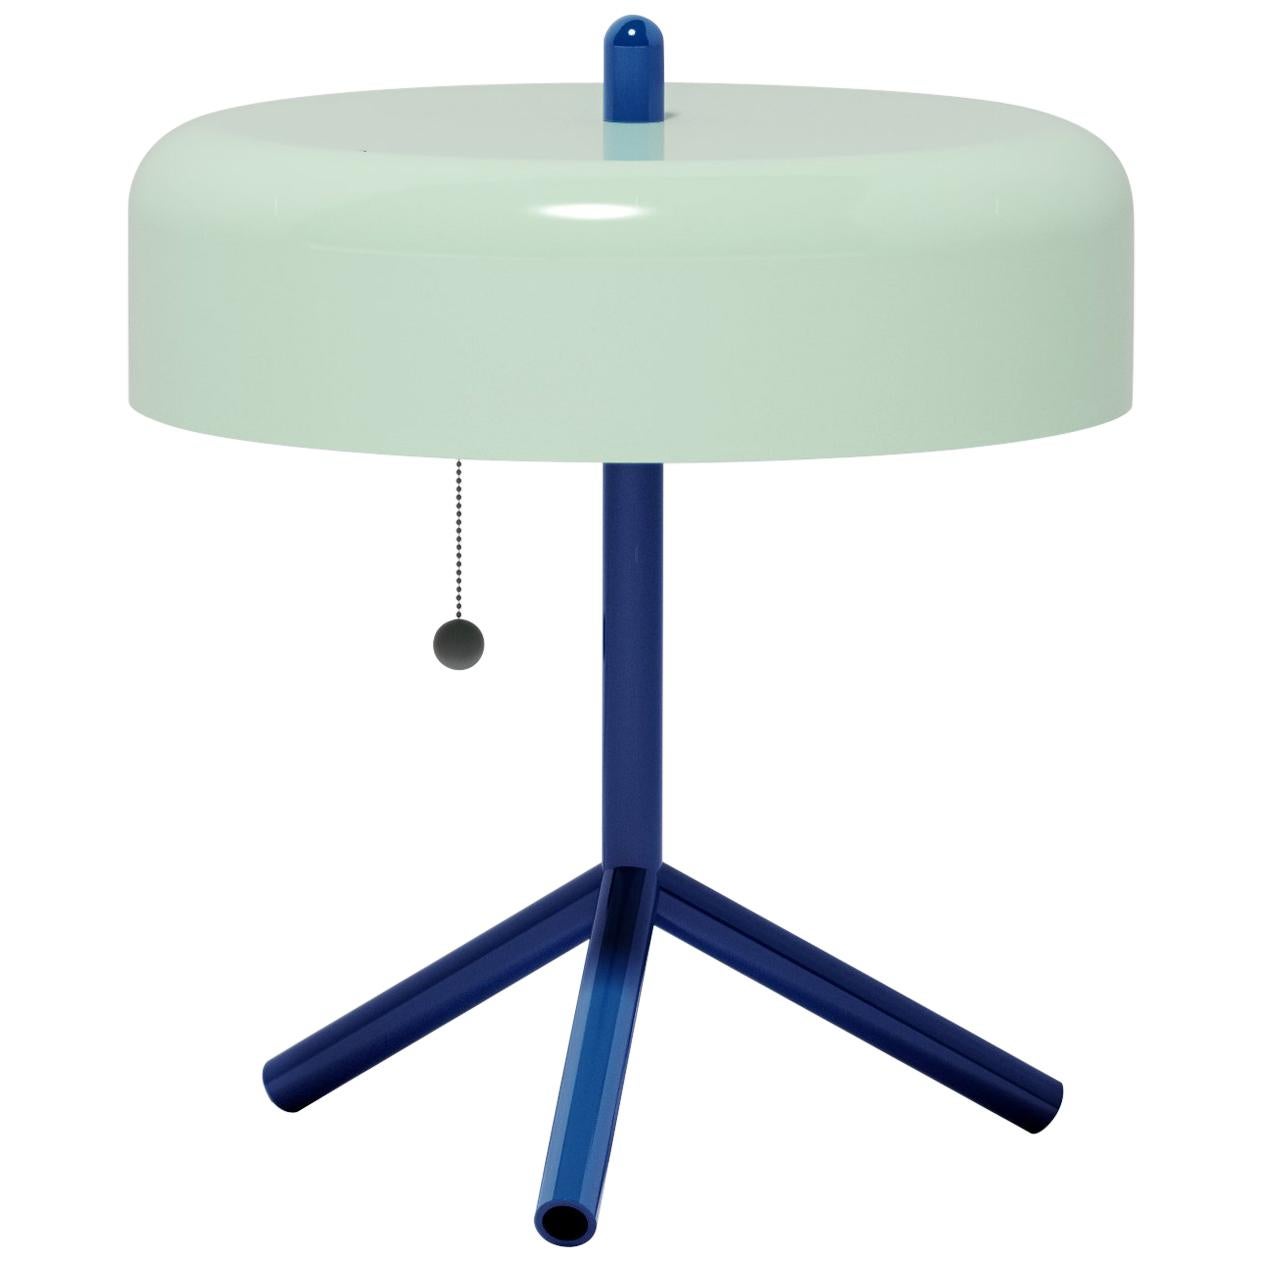 F/K/A Table Lamp in Mint, Cobalt Blue & Cherry Tomato by Jonah Takagi For Sale